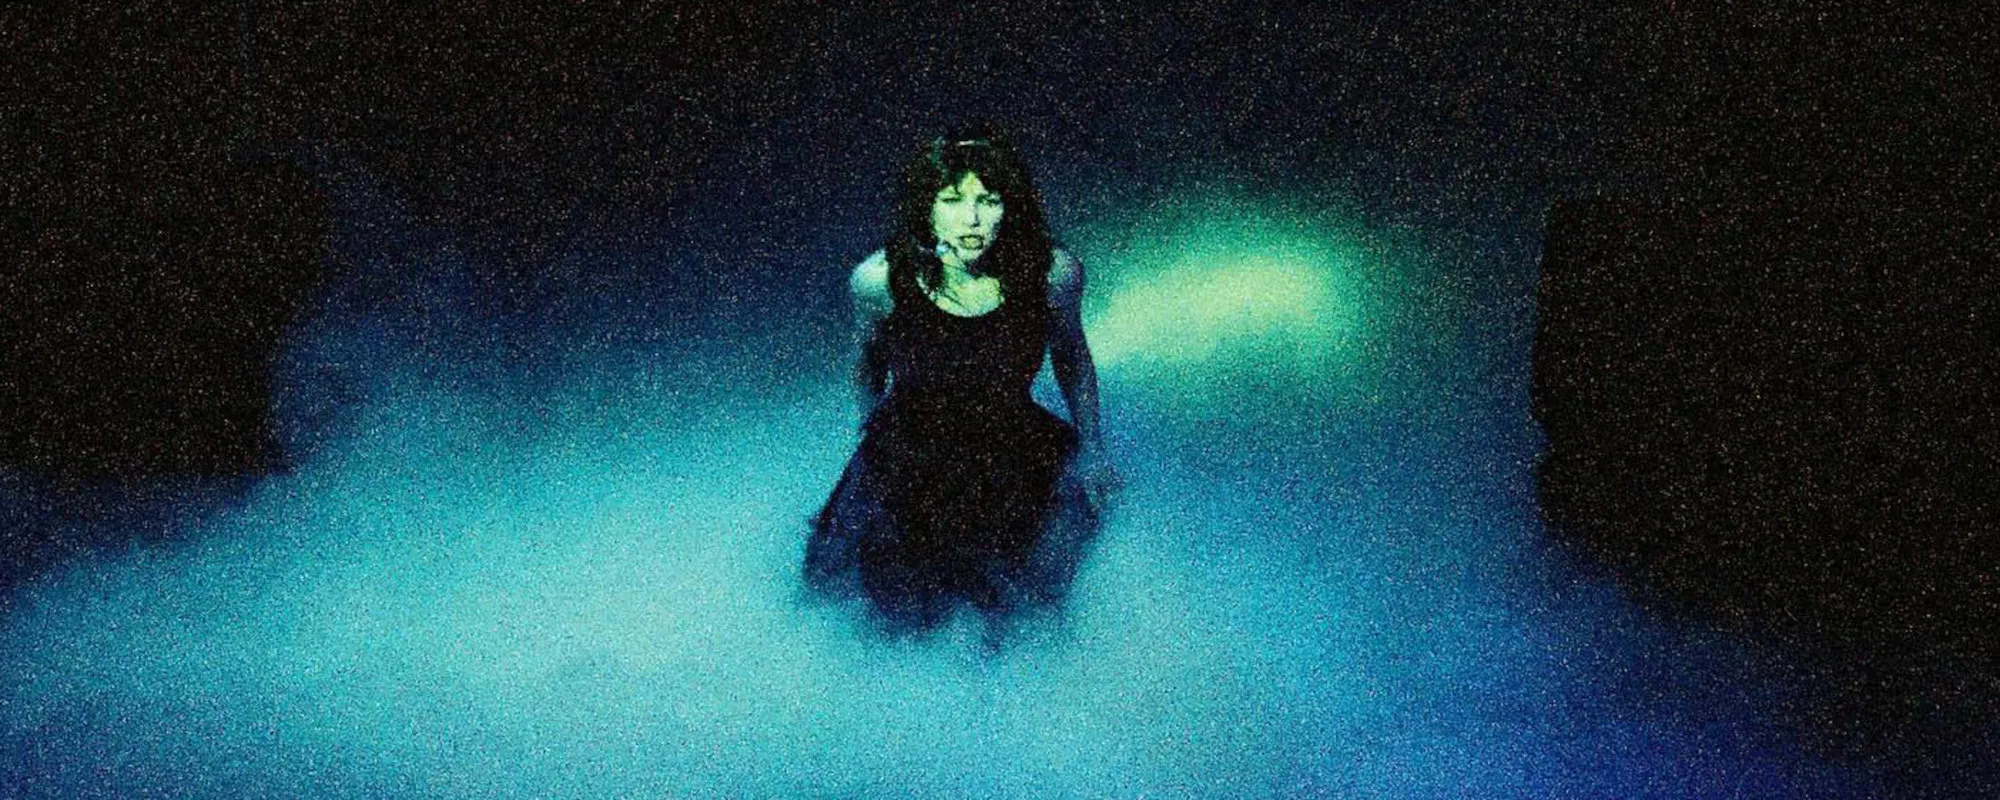 ‘Stranger Things’ Ran Kate Bush’s “Running Up That Hill” to Number 1